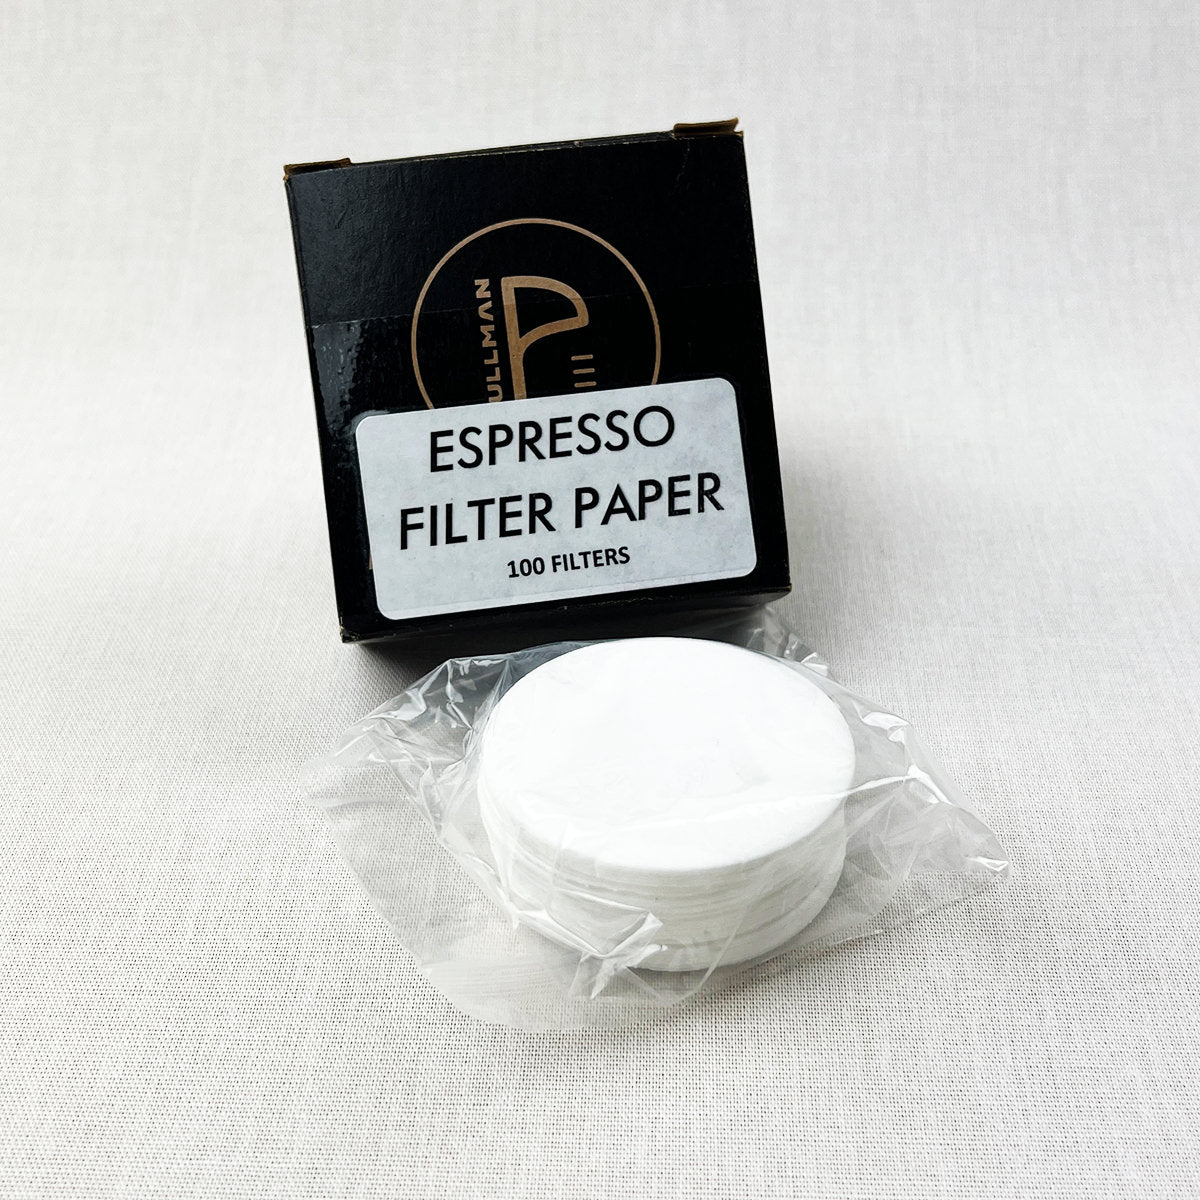 Pullman Espresso Filter Papers (100)